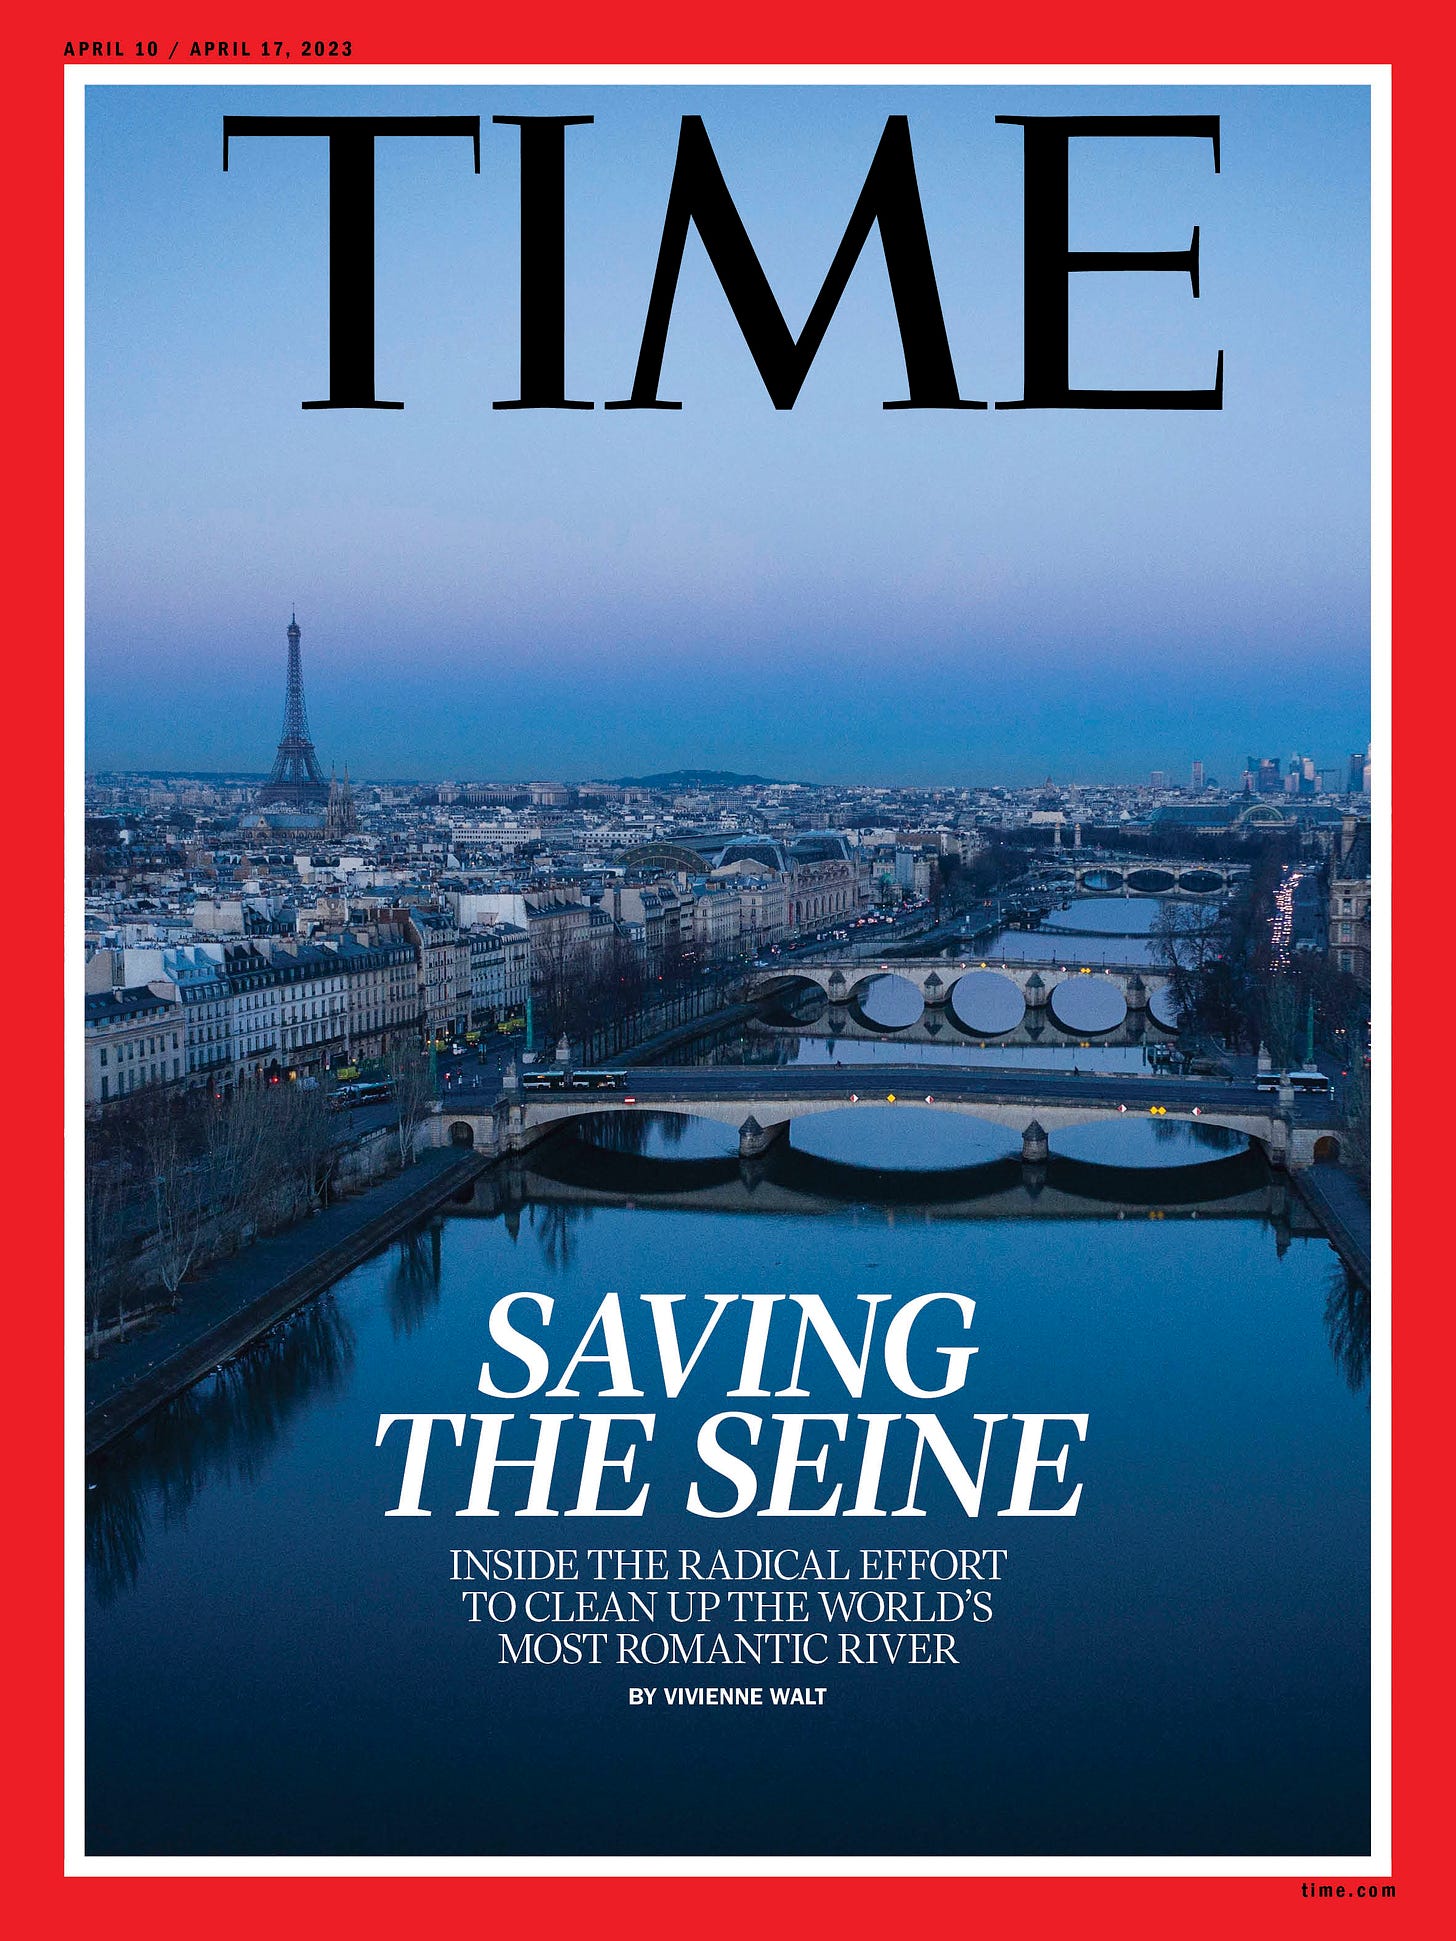 Inside the Billion-Dollar Effort to Clean Up the Seine | Time